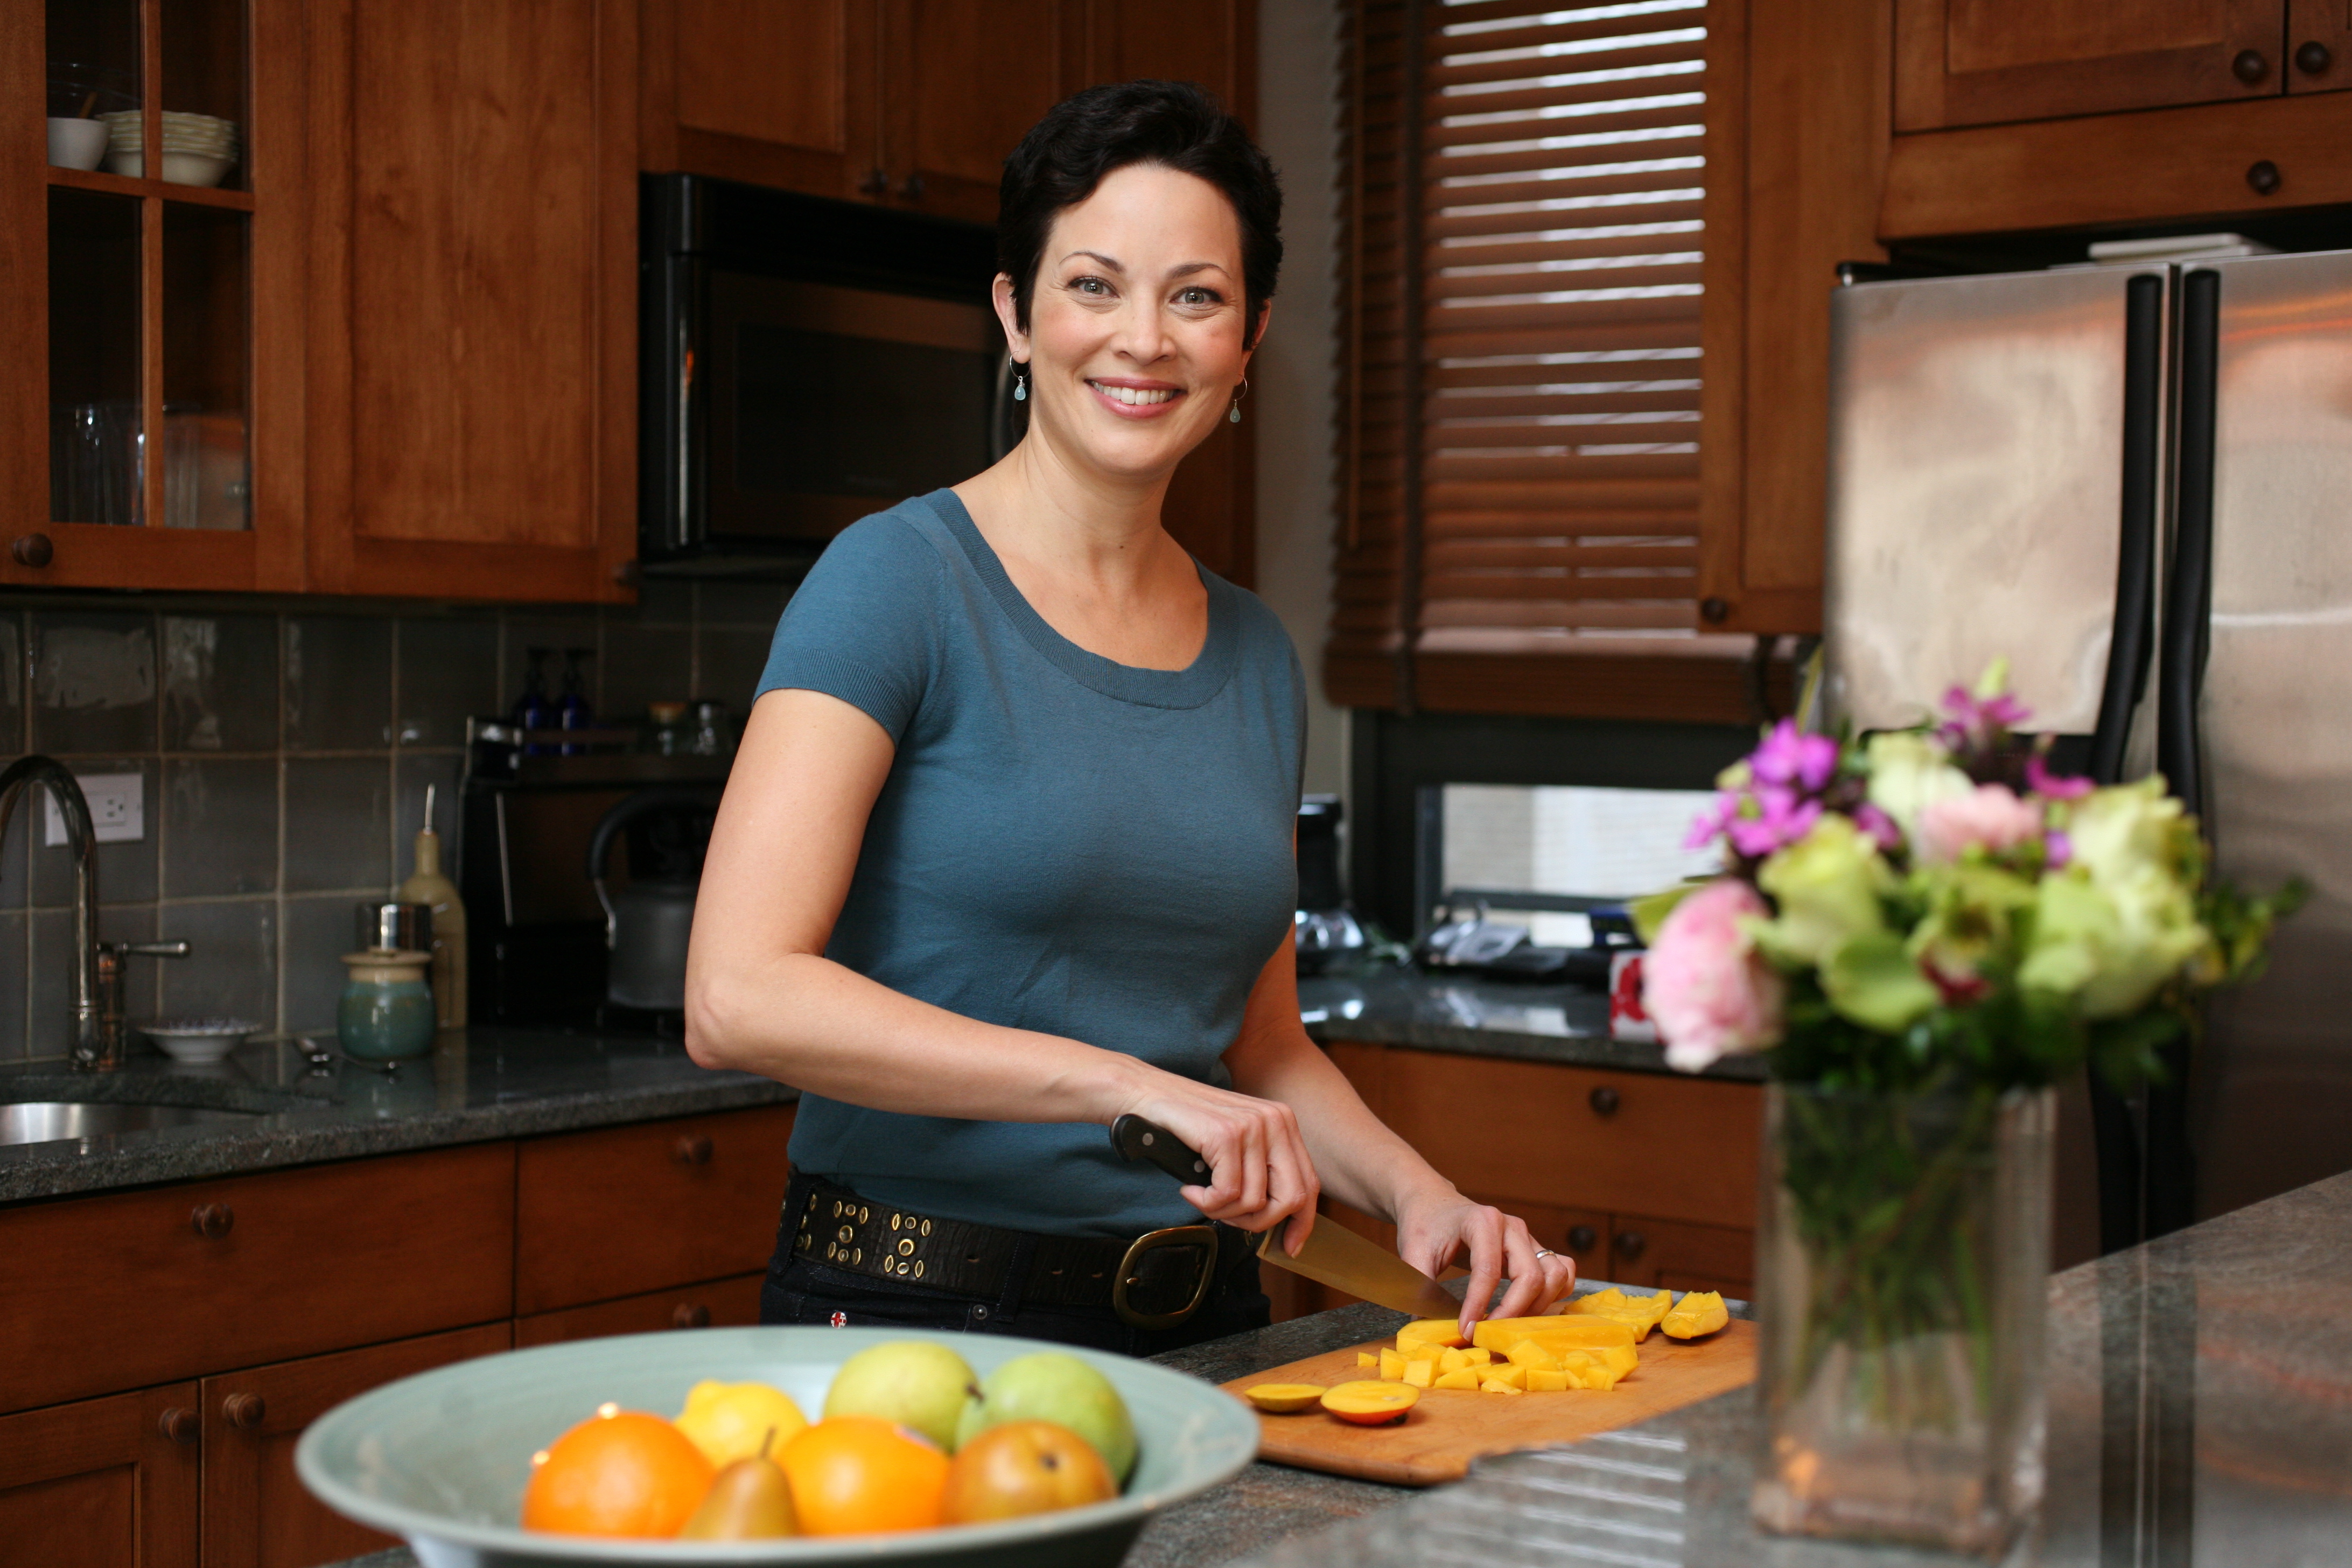 A Cooking Show Host's Recipe for Kitchen Success